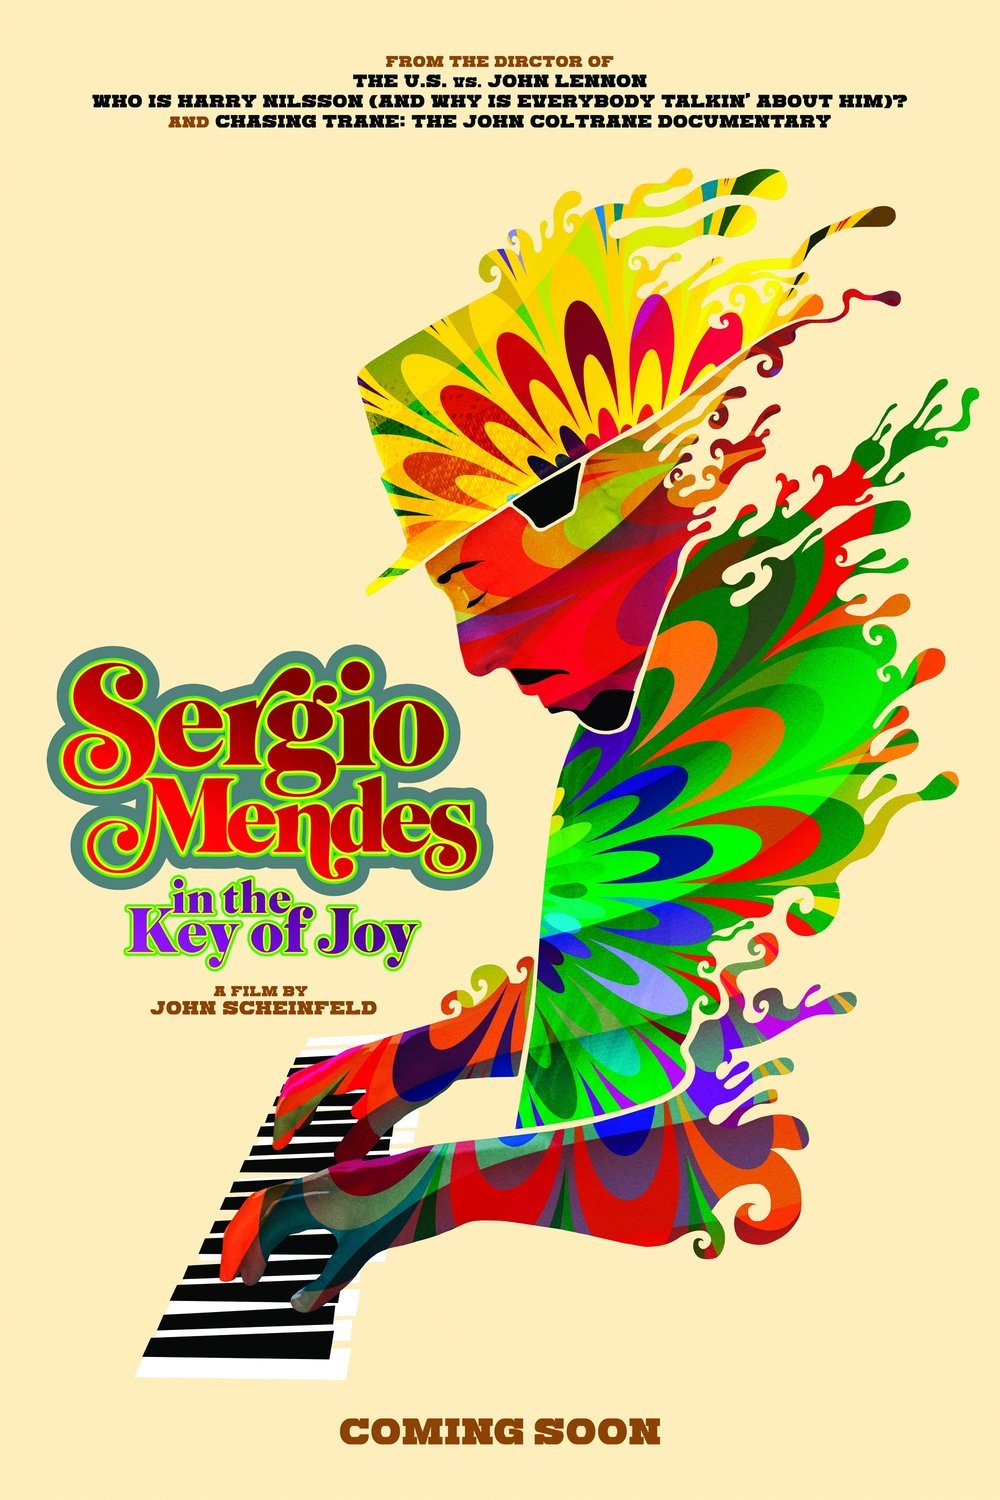 Poster of the movie Sergio Mendes in the Key of Joy